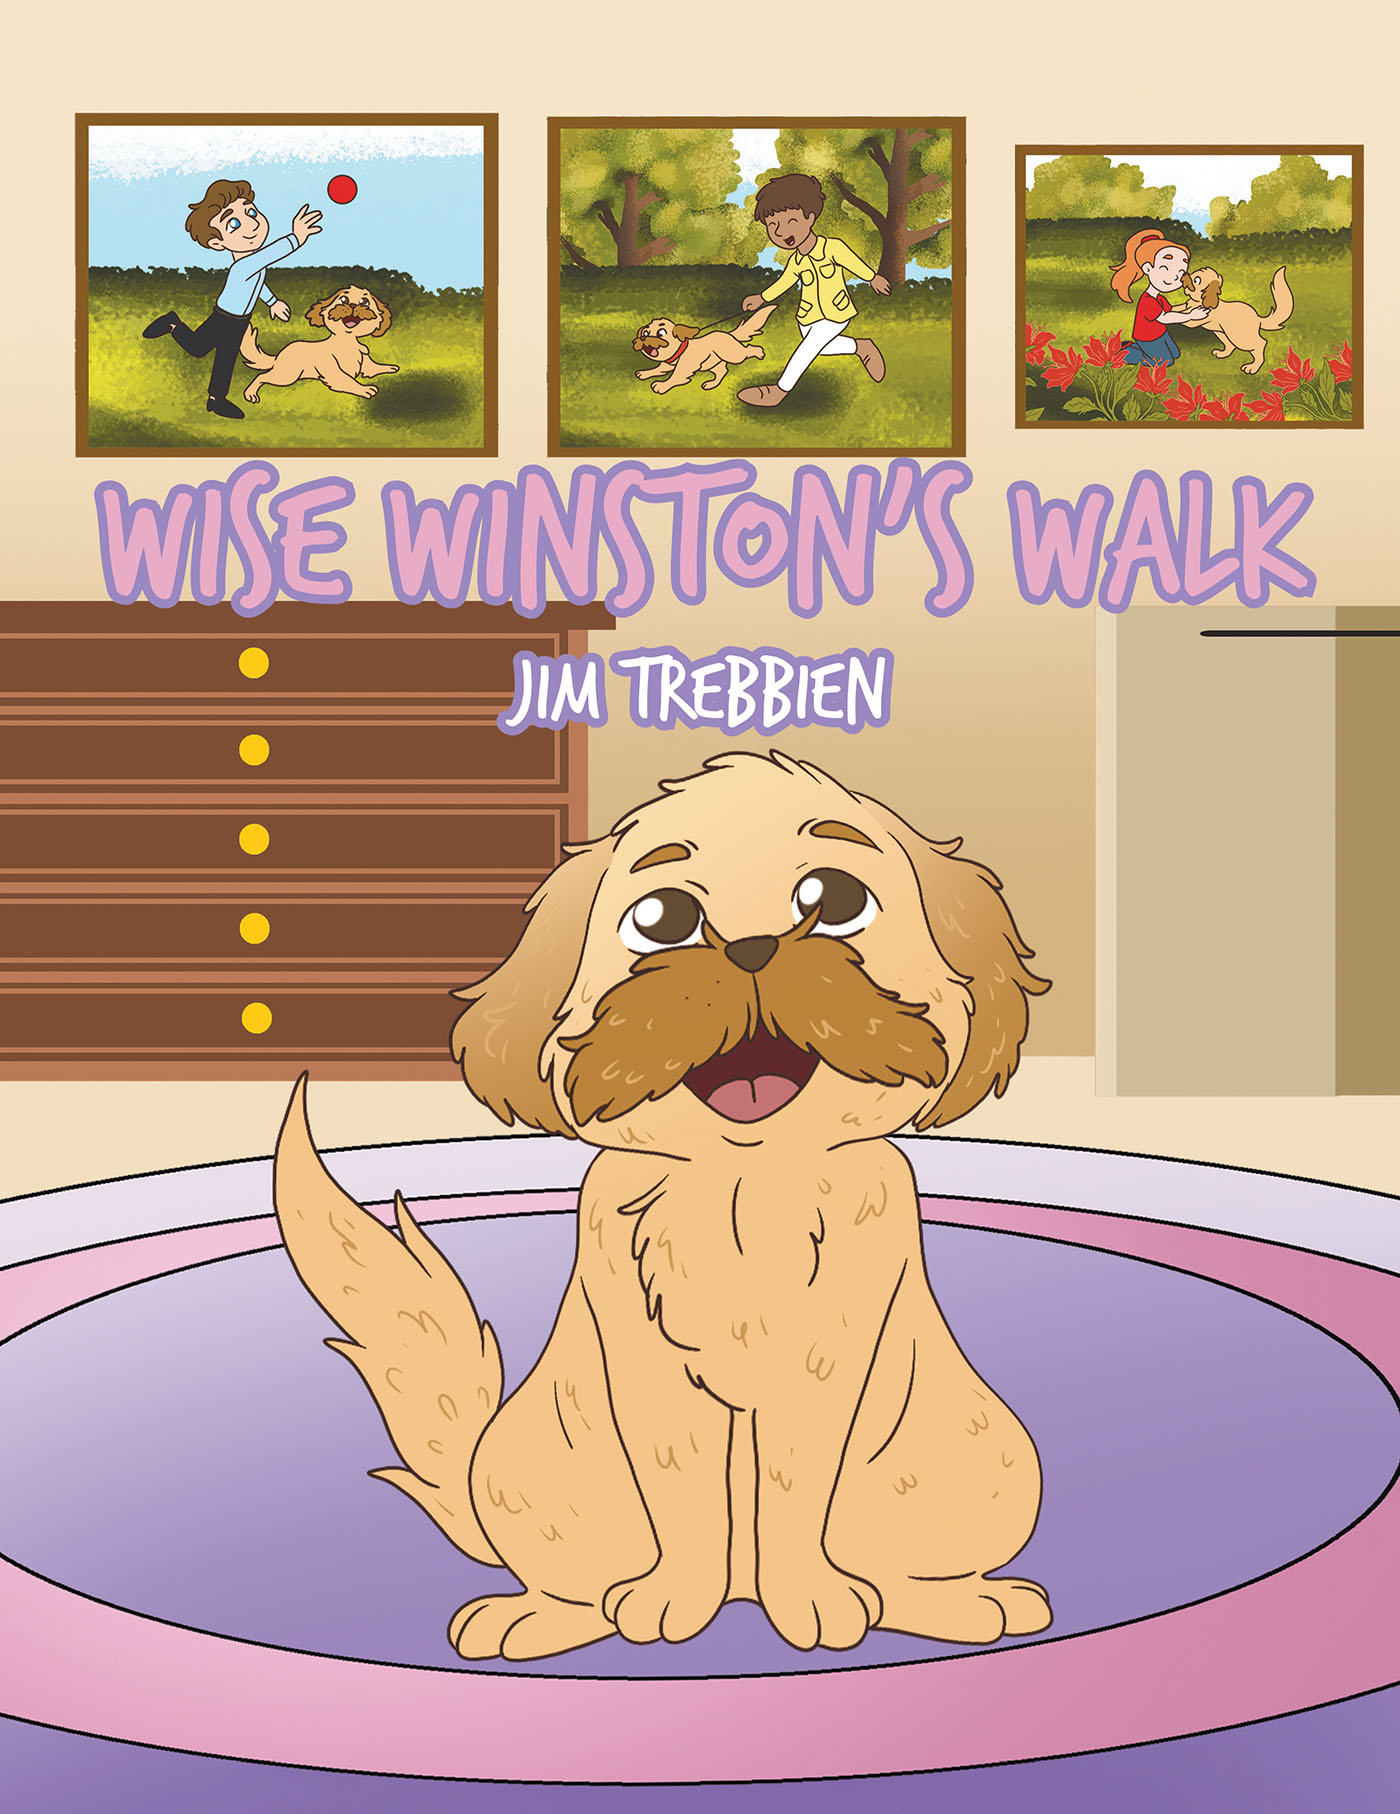 Jim Trebbien’s Newly Released "Wise Winston’s Walk" is a Collection of Helpful Guidance and Life Lessons for Upcoming Generations